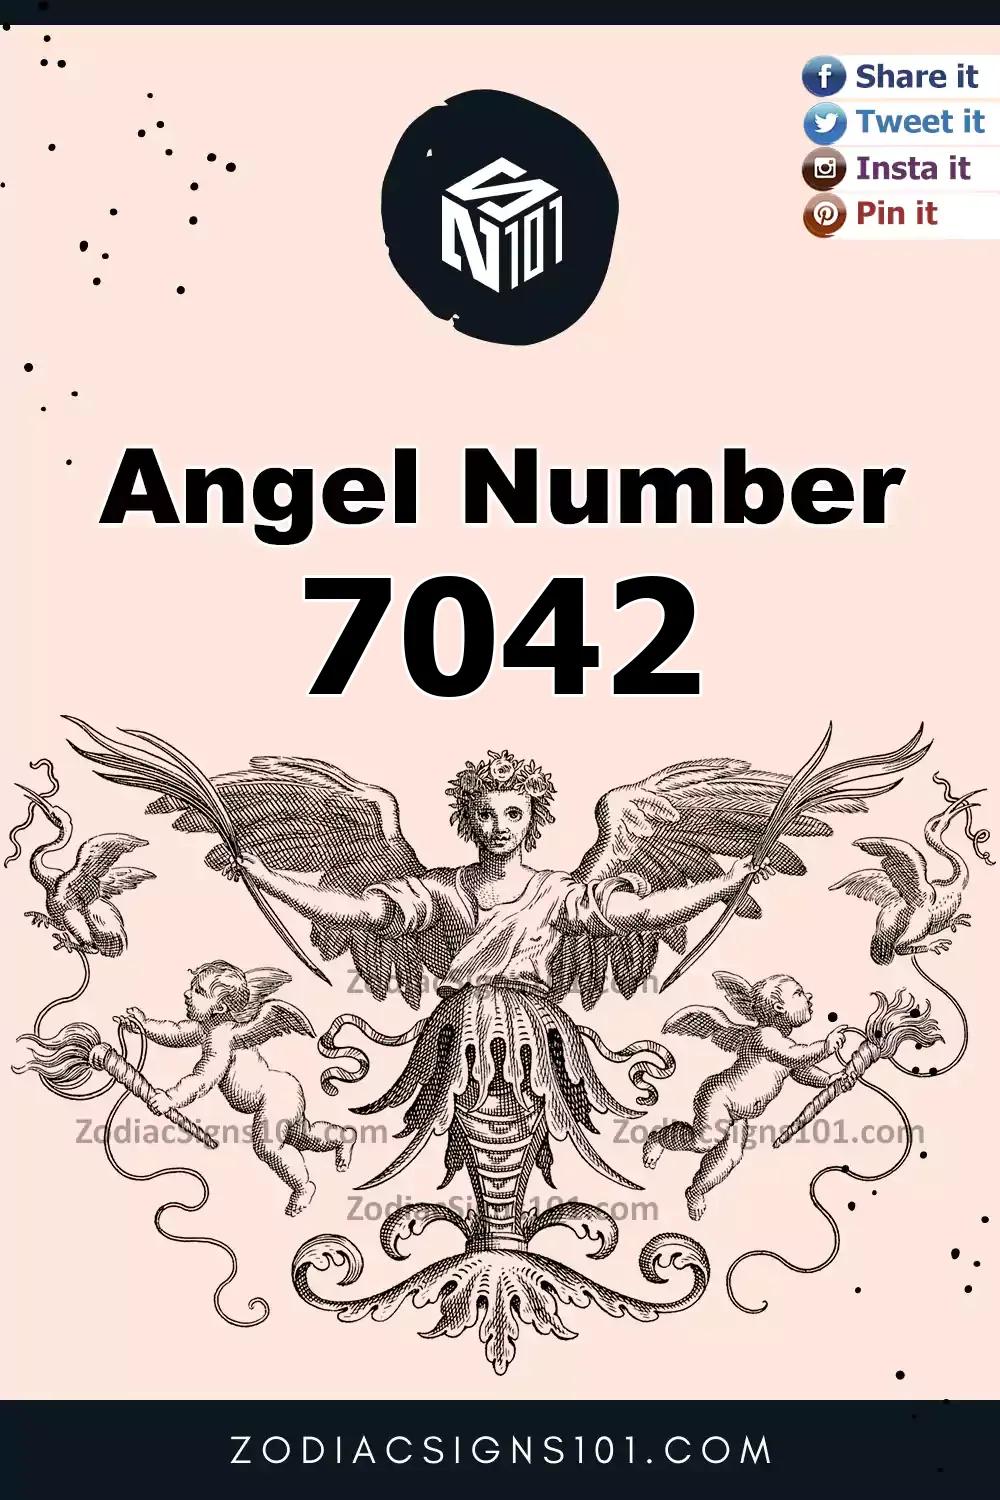 7042 Angel Number Meaning